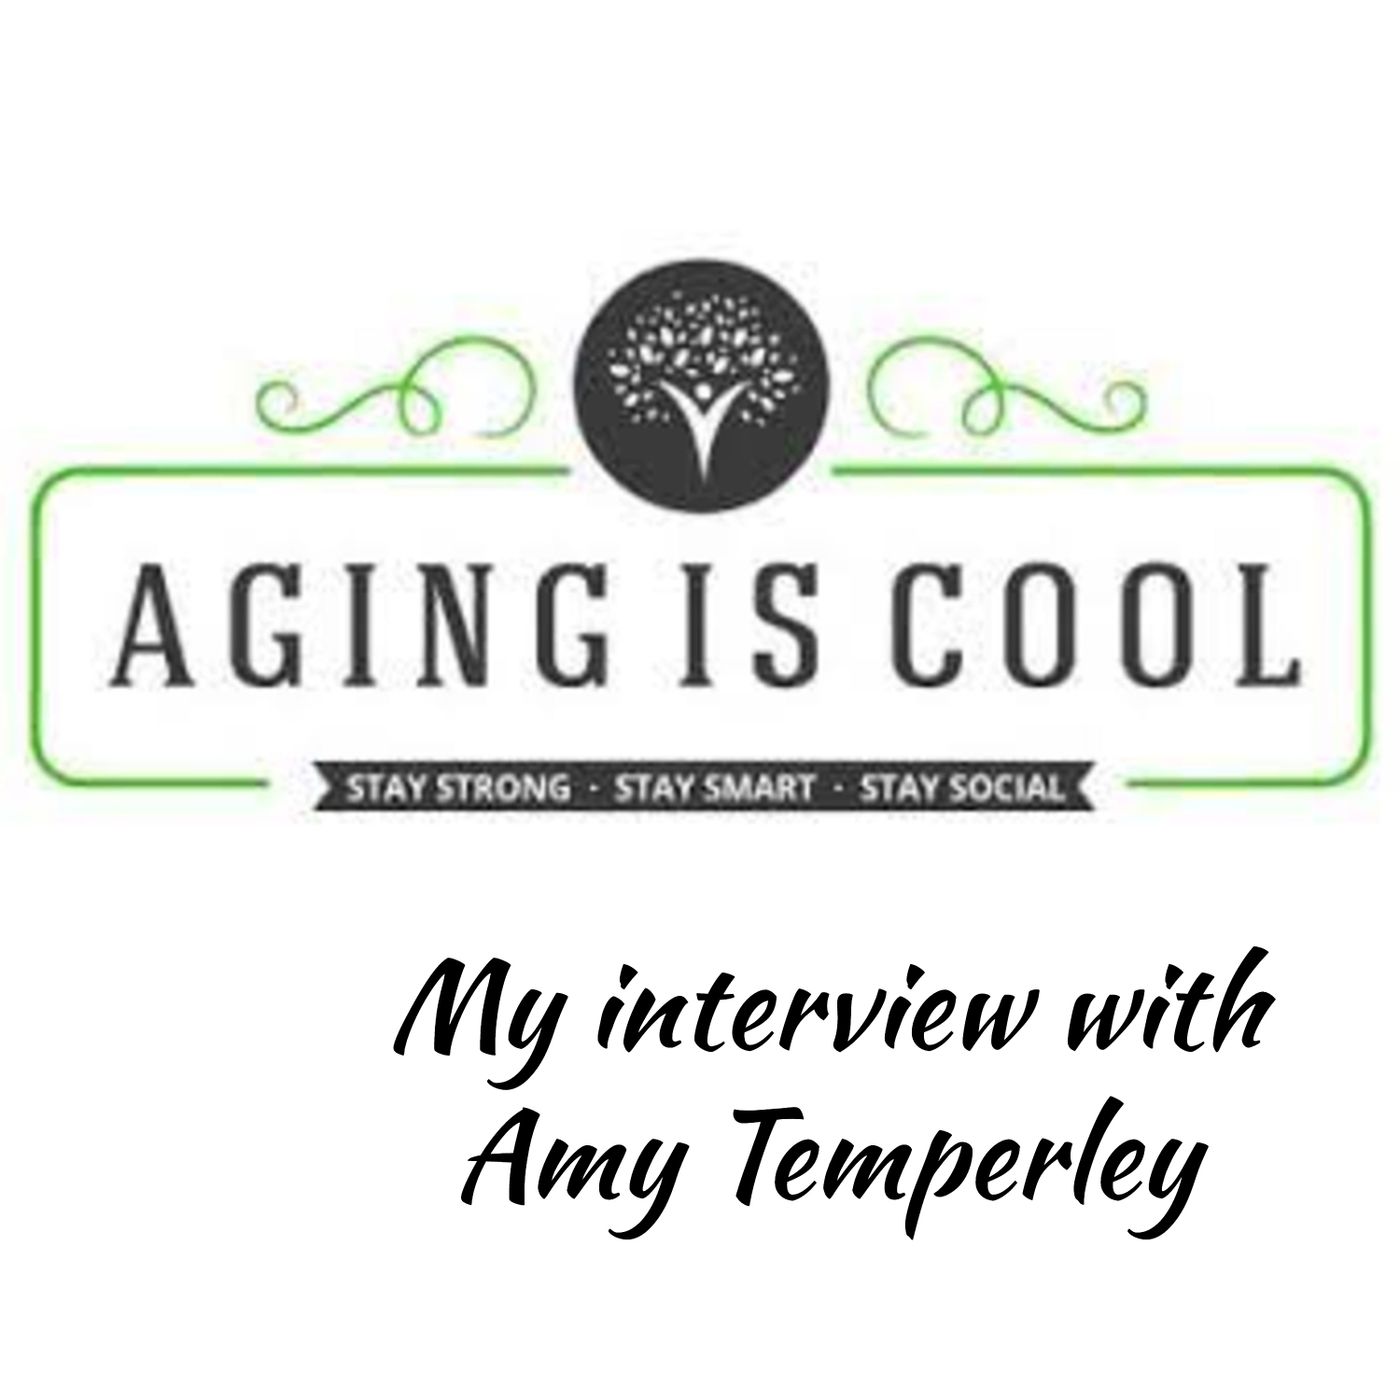 Amy Temperley from Aging Is Cool